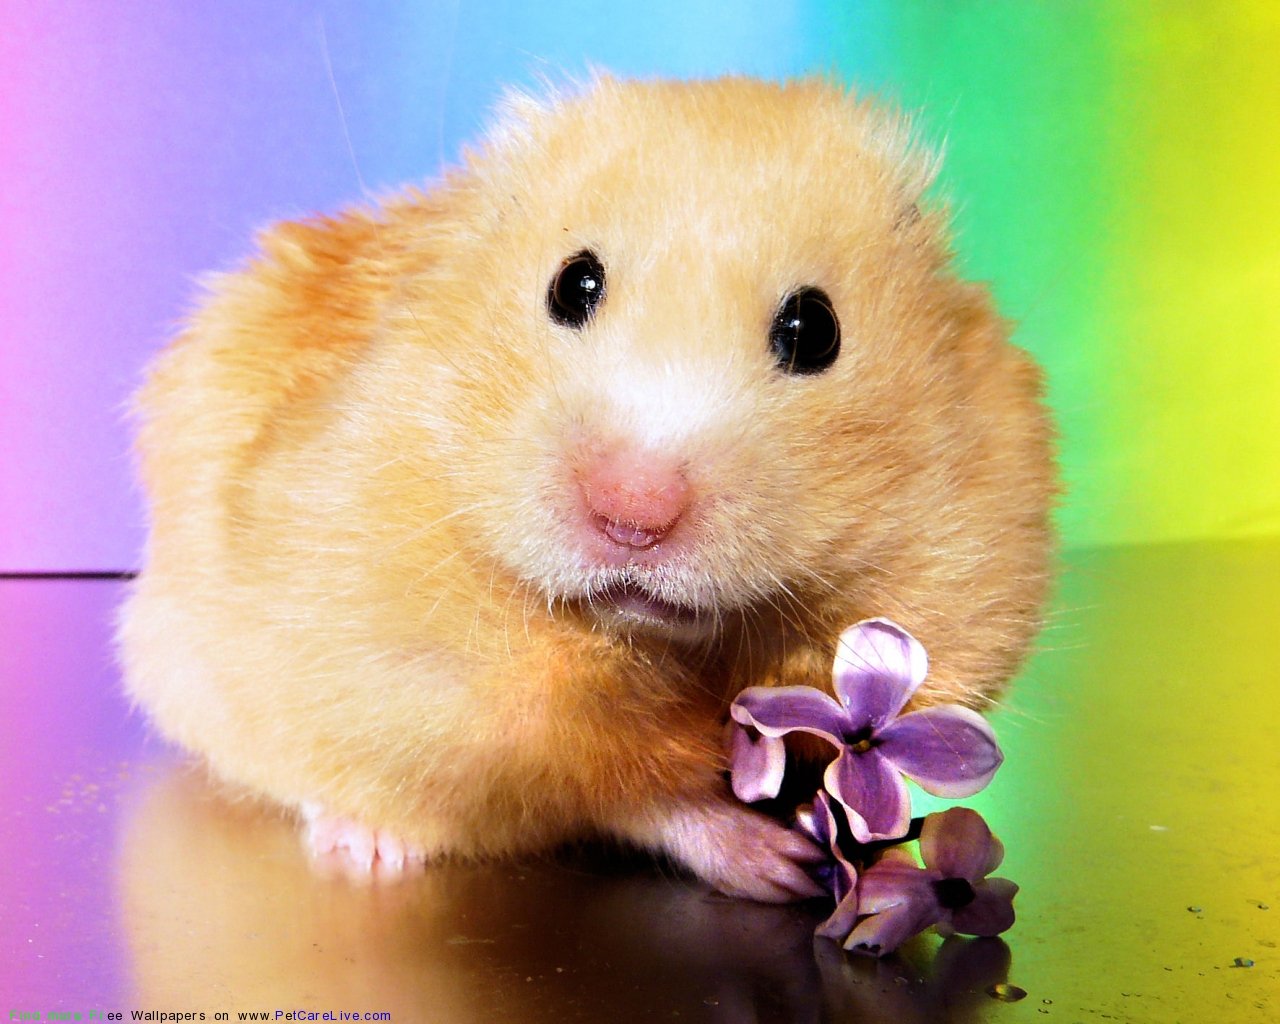 The Free Hamster computer wallpaper pictures for PC computer 14